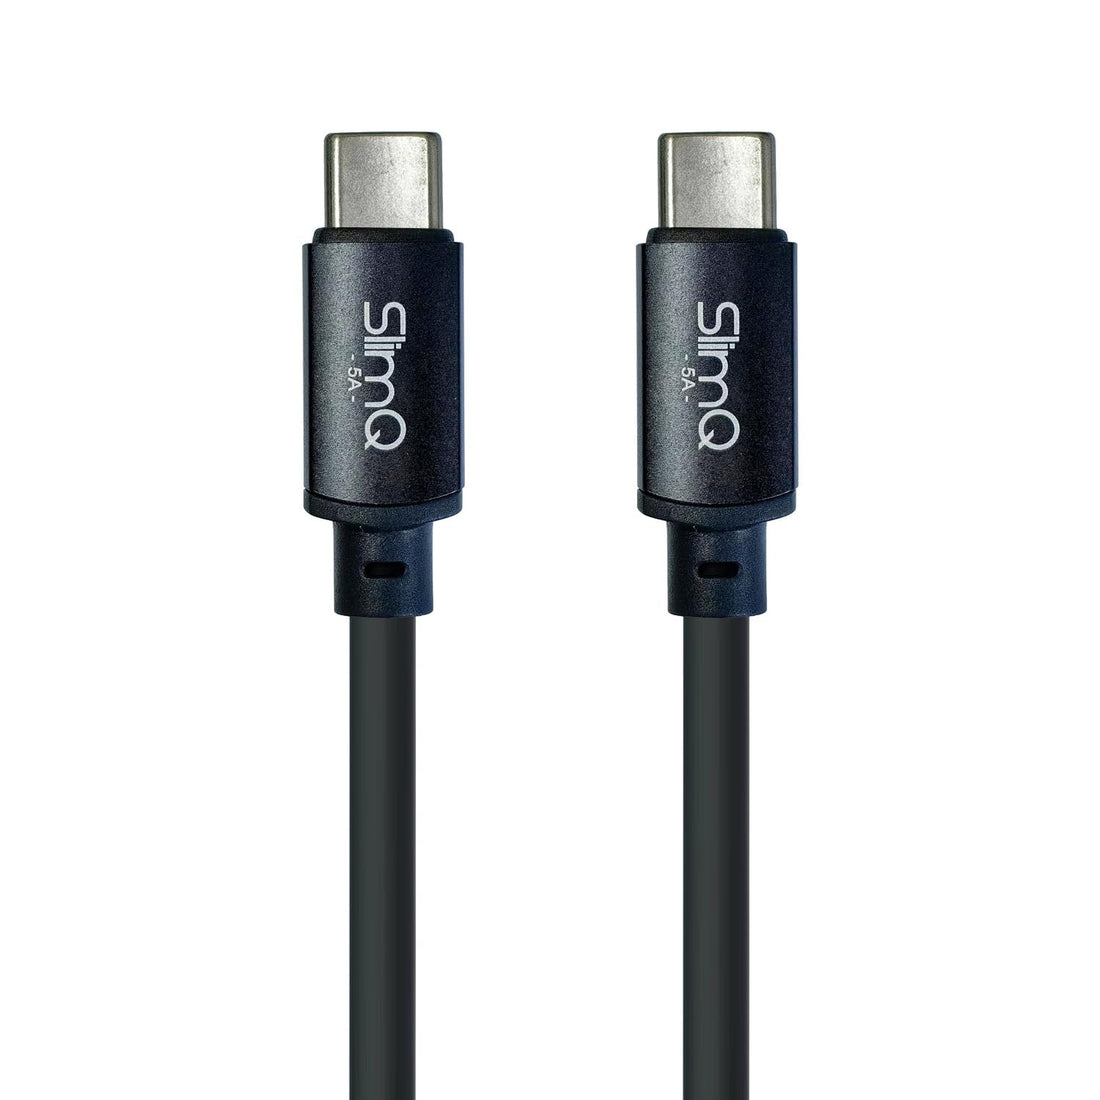 SlimQ 𝗦𝗹𝗶𝗺𝗤 USB C to USB C Charging Cable, Type-C to Type-C, C to C 3a for Mobile Phones, 100w Power for Laptops